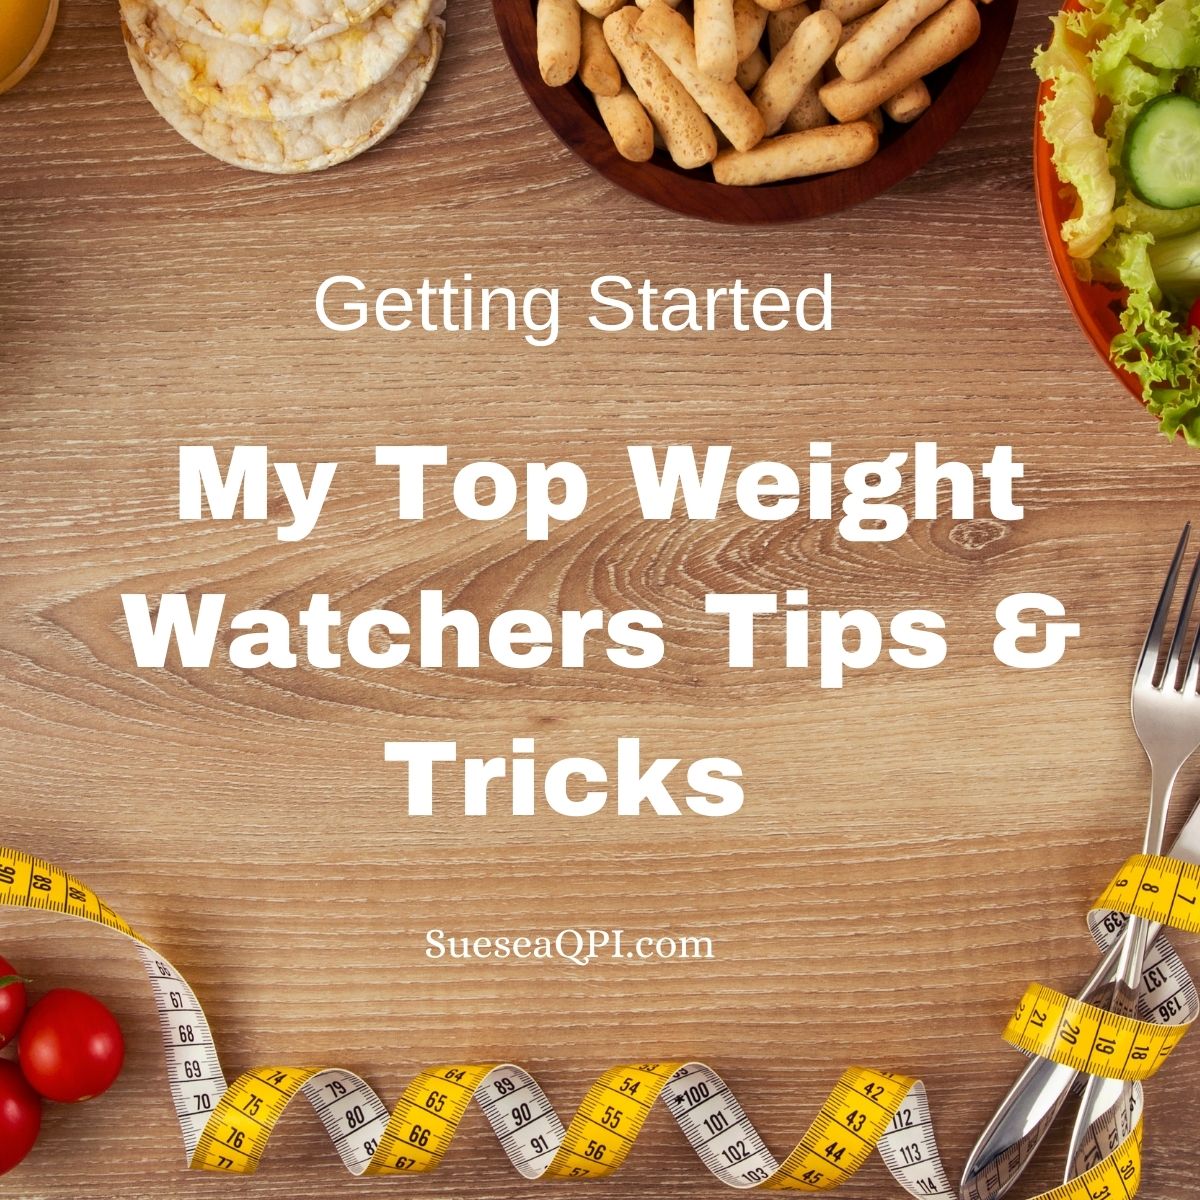 Bowls of snacks on a wooden cutting board with a tape measure and my top Weight Watchers Tips & Tricks